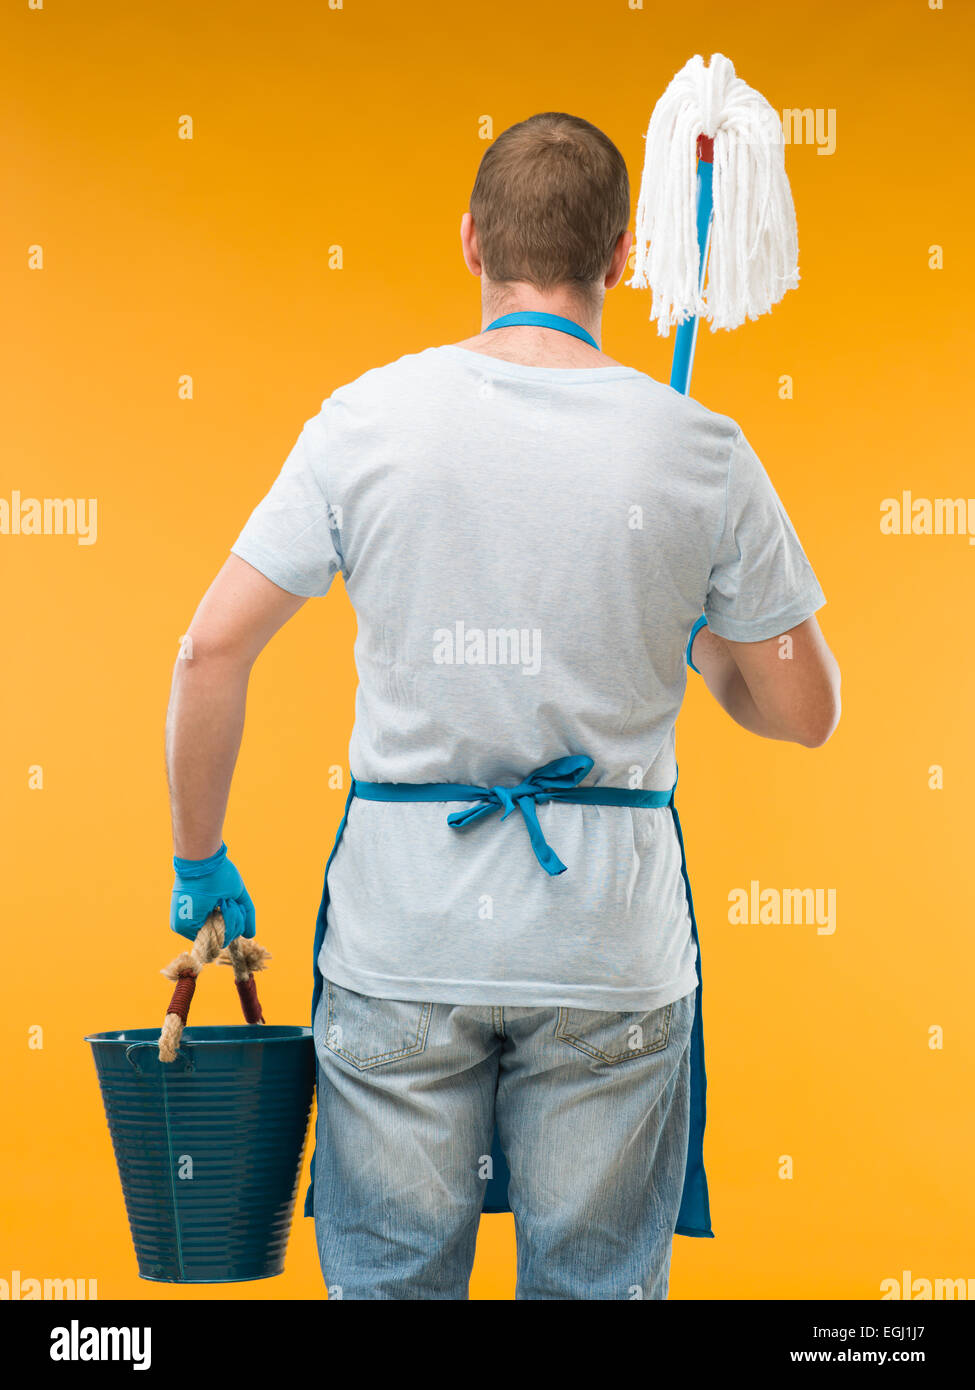 back view of caucasian male cleaner holding mop and bucket against yellow  background Stock Photo - Alamy